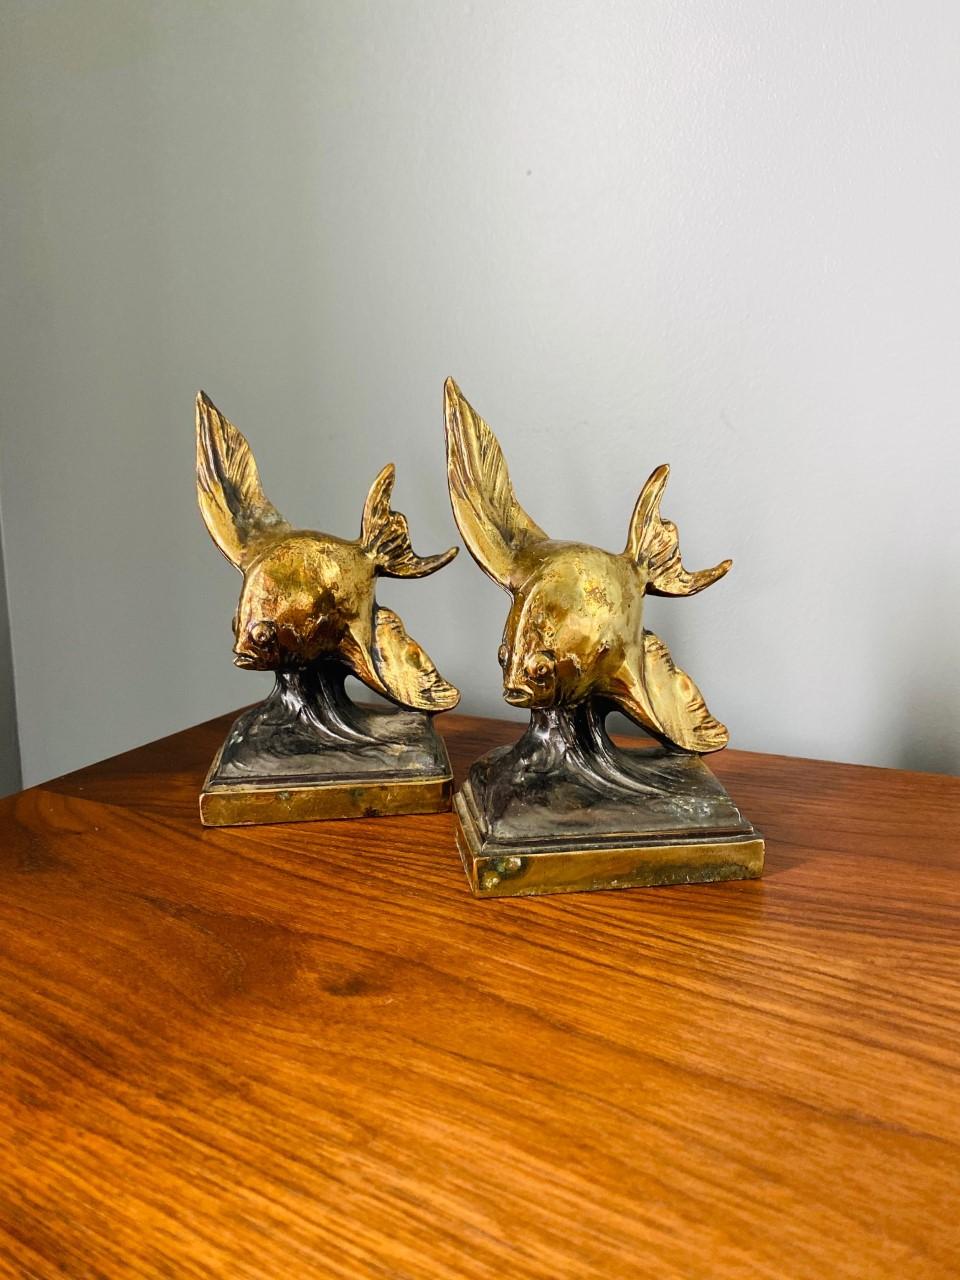 Italian Vintage Rare Pair of Brass Flying Fish Bookends, 1930s For Sale